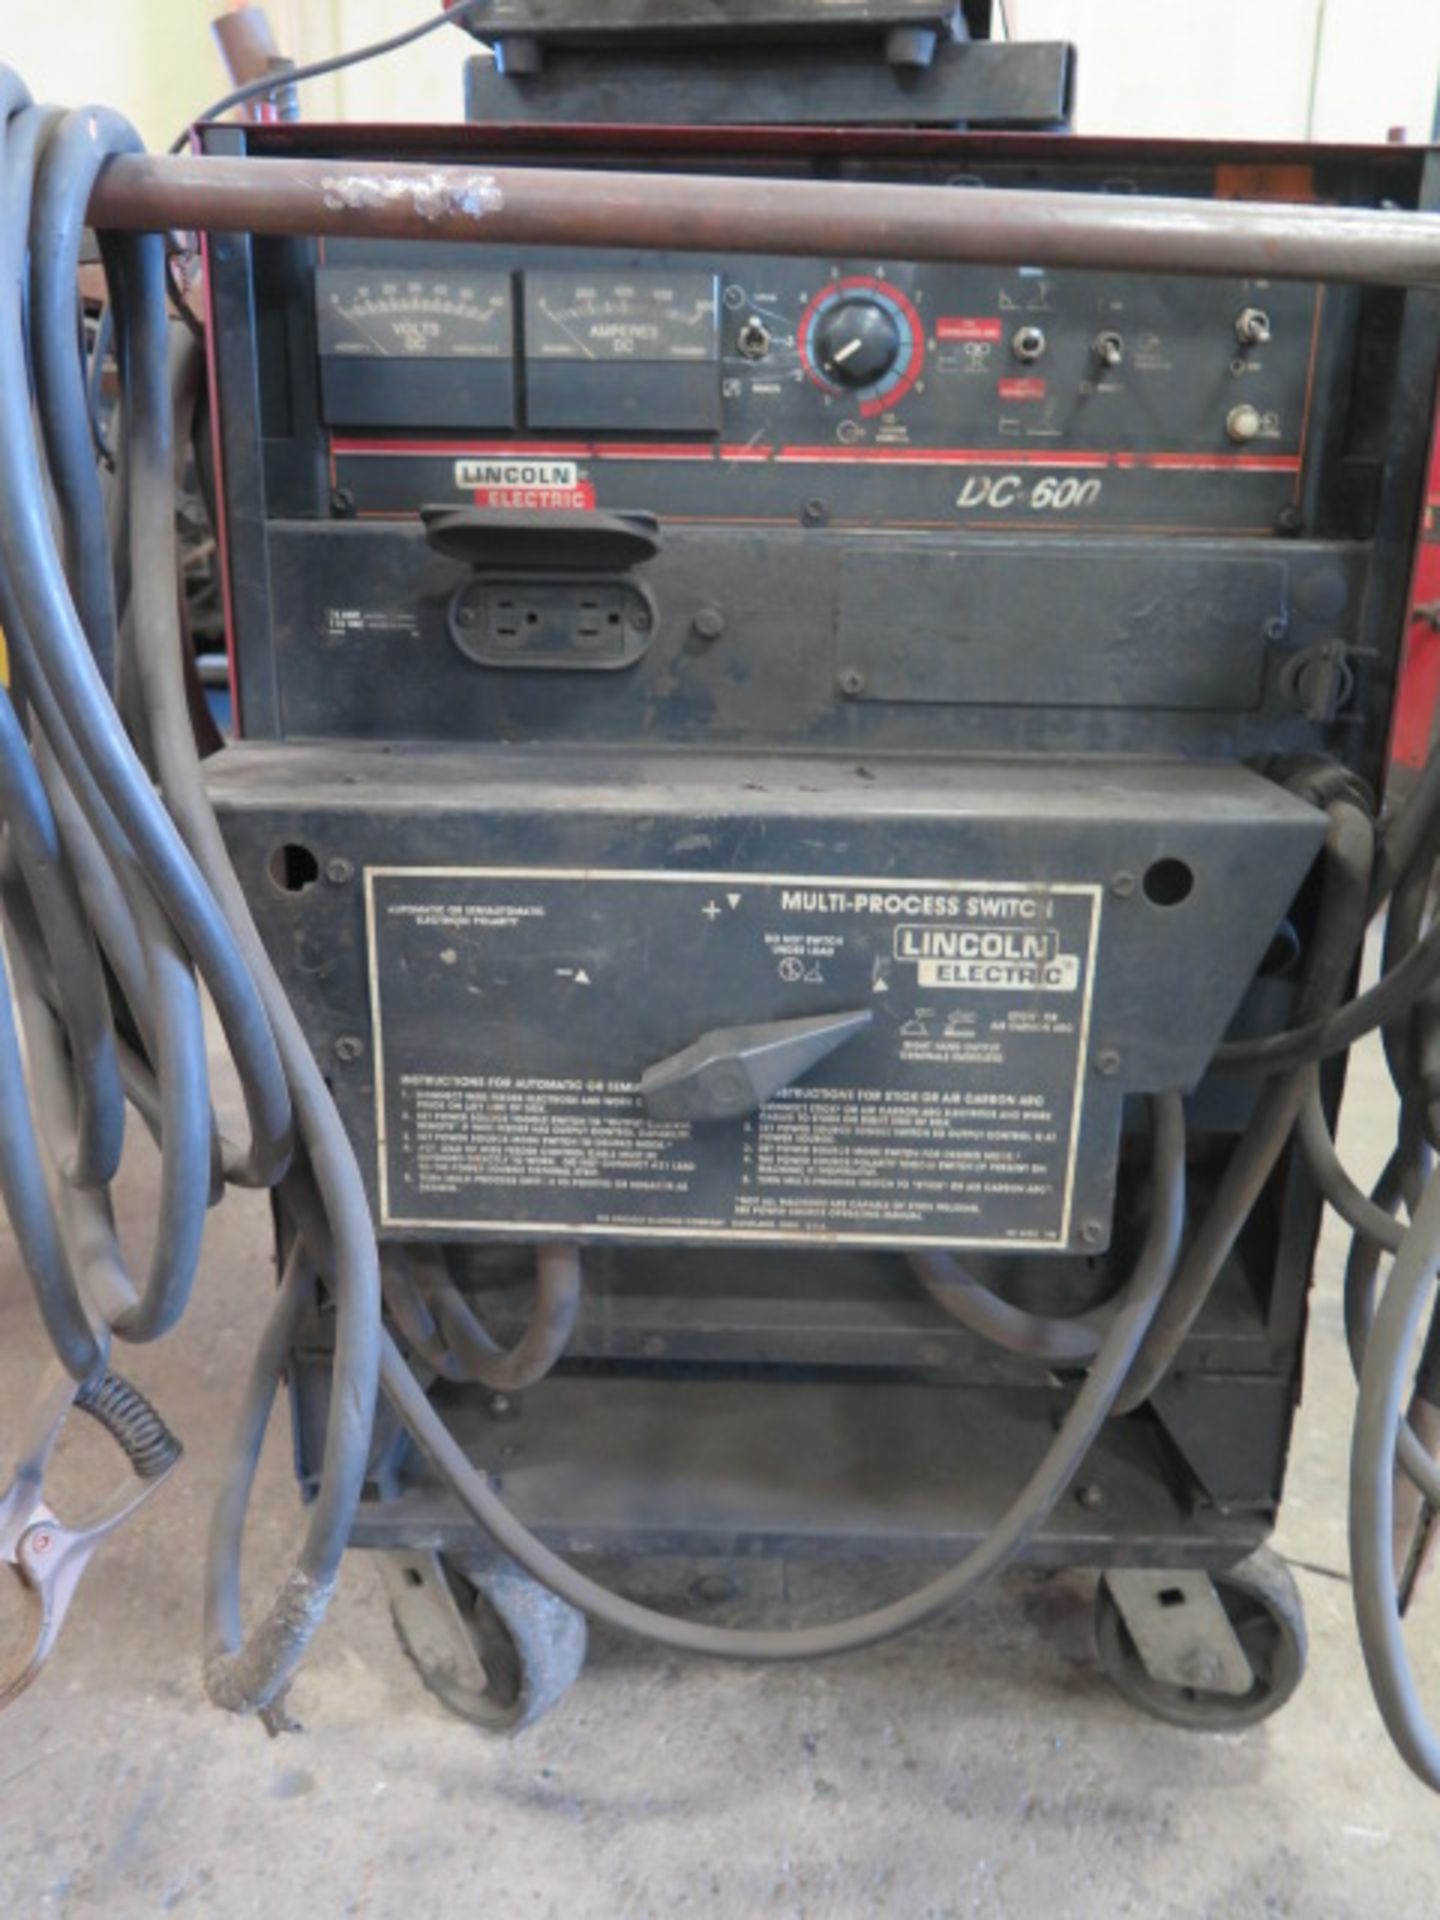 Lincoln DC-600 DC Arc Welding Power Source s/n U1080907228 w/ Lincoln Multi-Process Switch, - Image 5 of 6